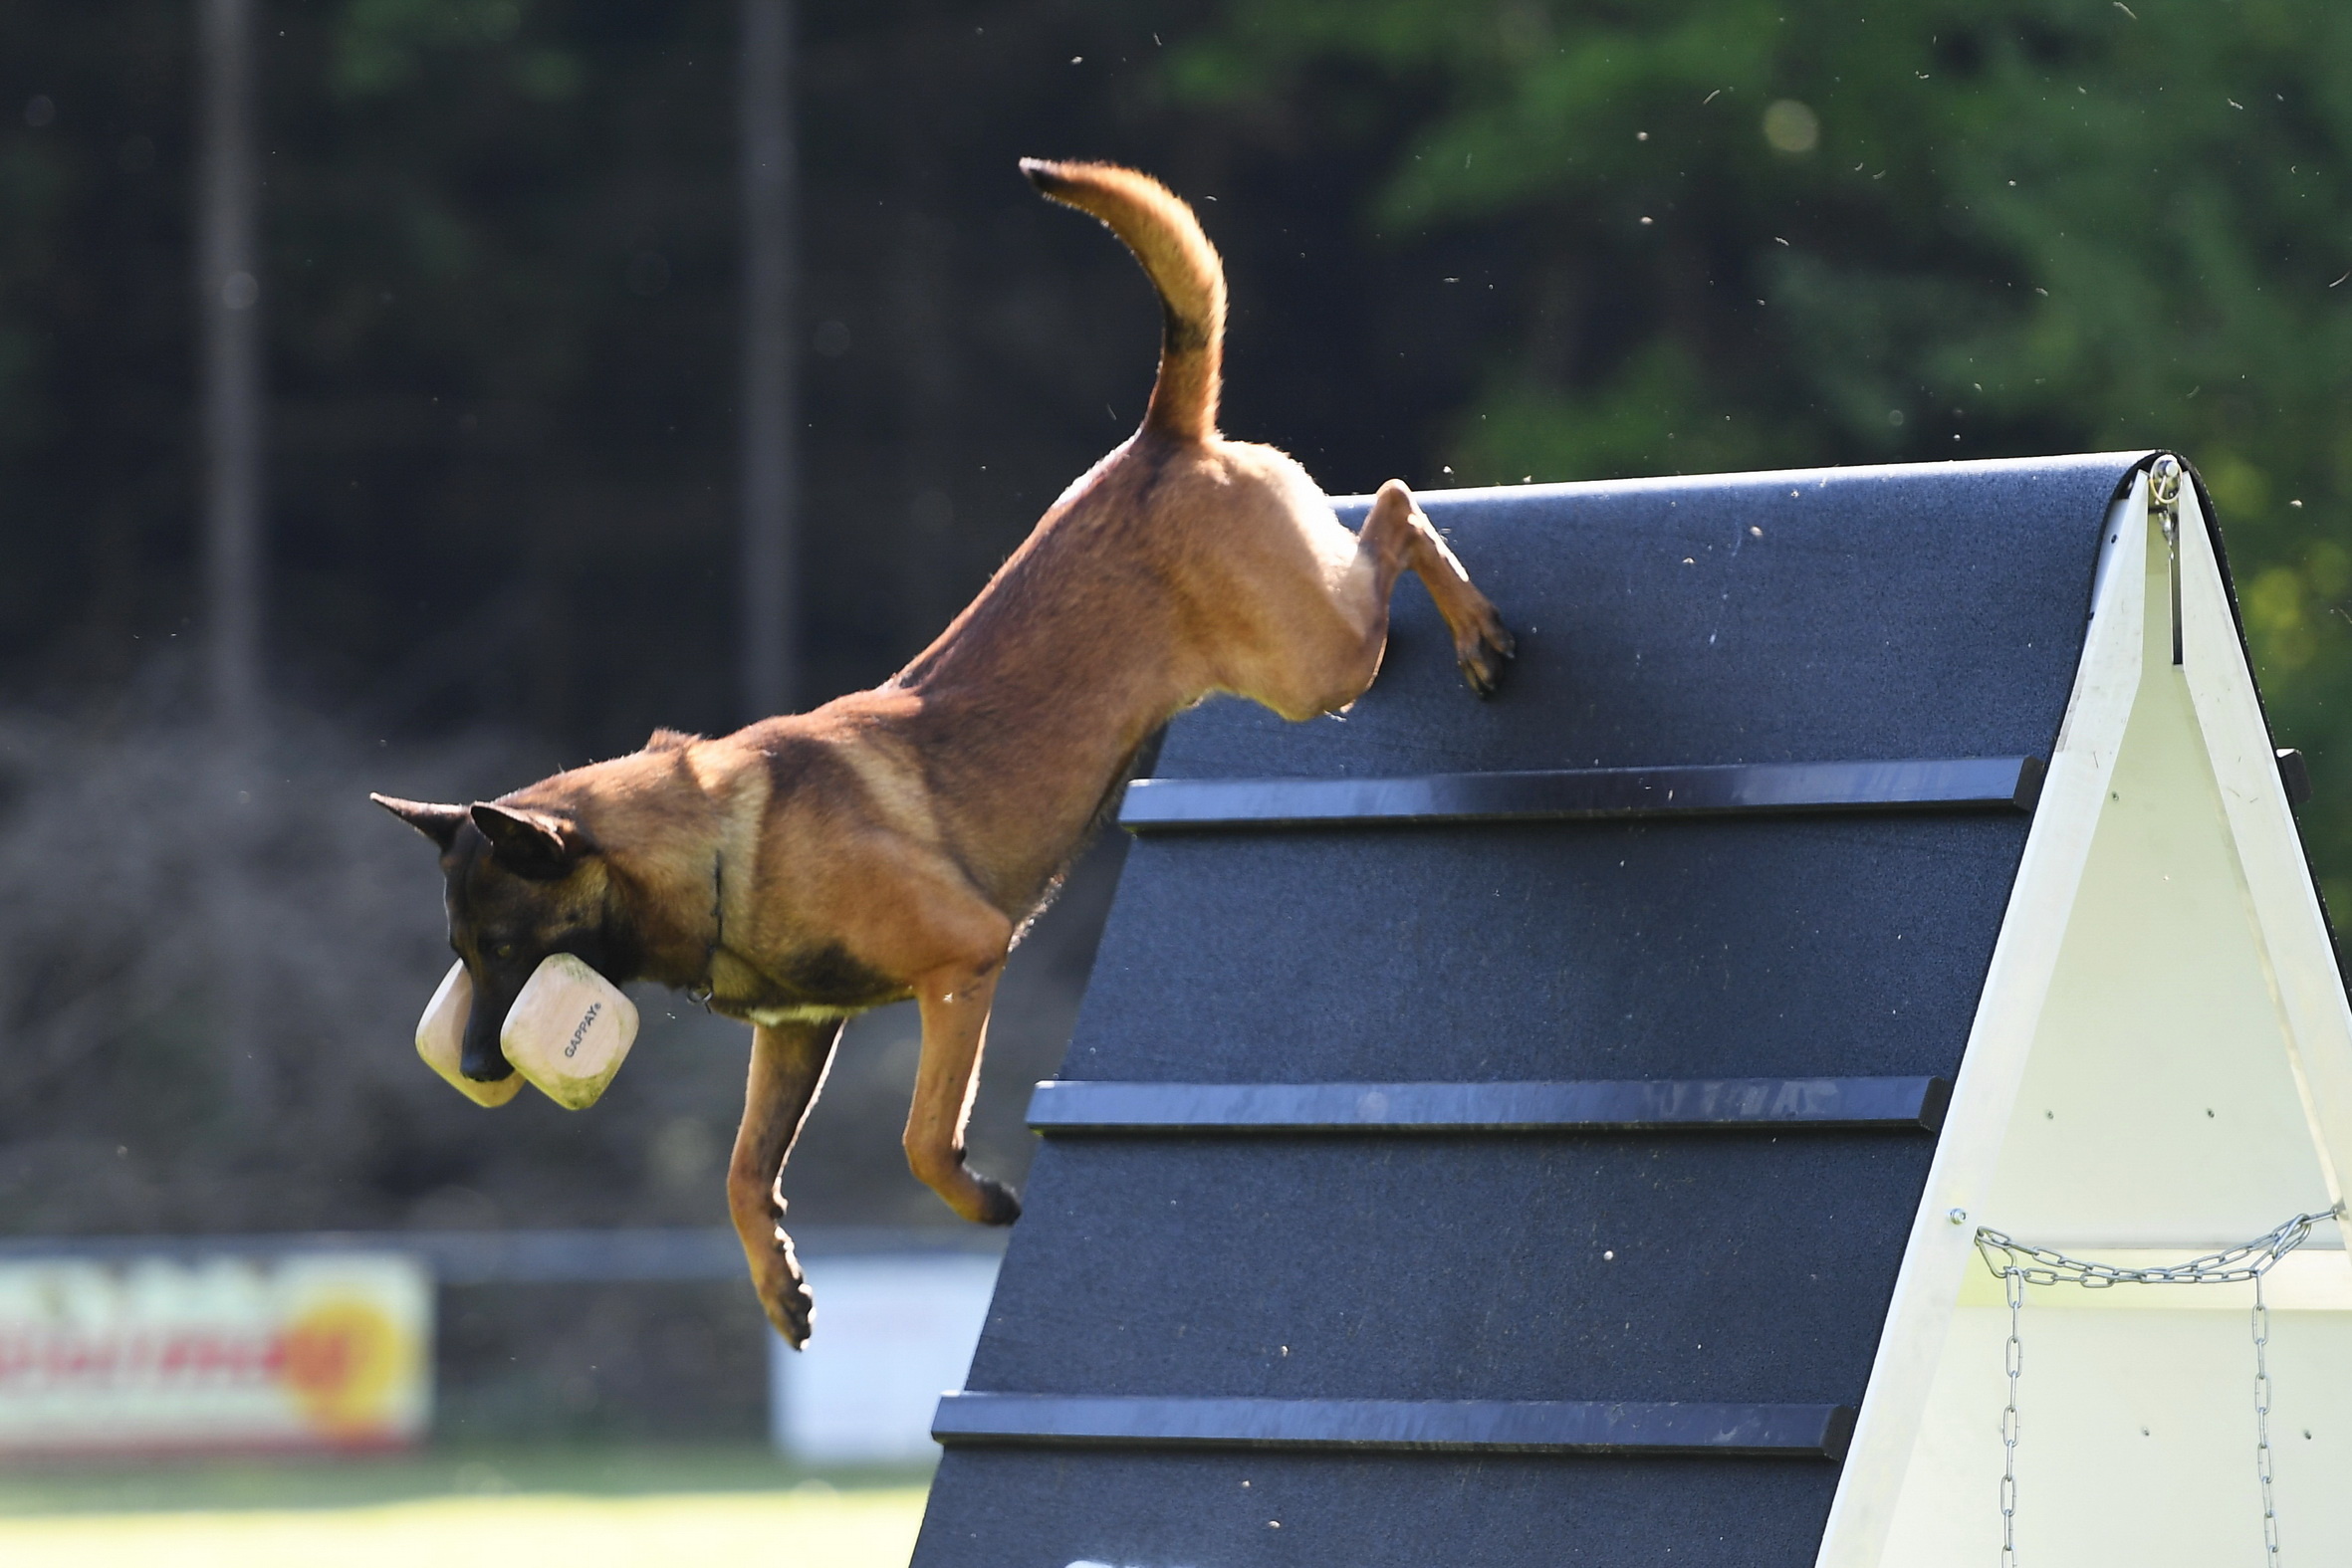 Dog Sports: Working Dog, FCI IPO World Championship, Training with Obstacles. 2370x1580 HD Wallpaper.